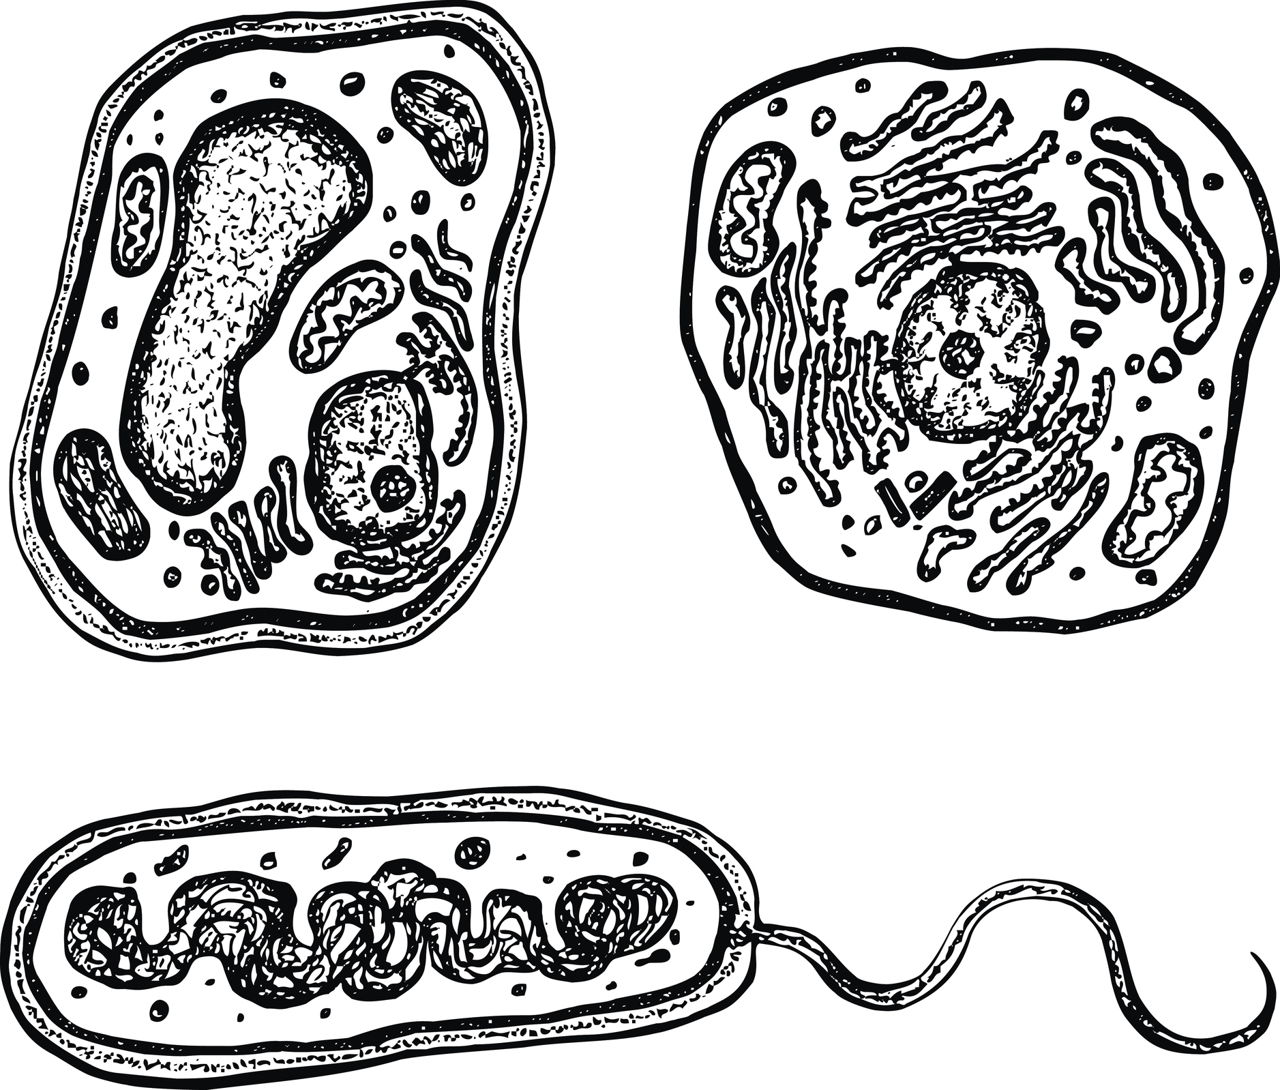 Information About the Smooth Endoplasmic Reticulum and Its ...